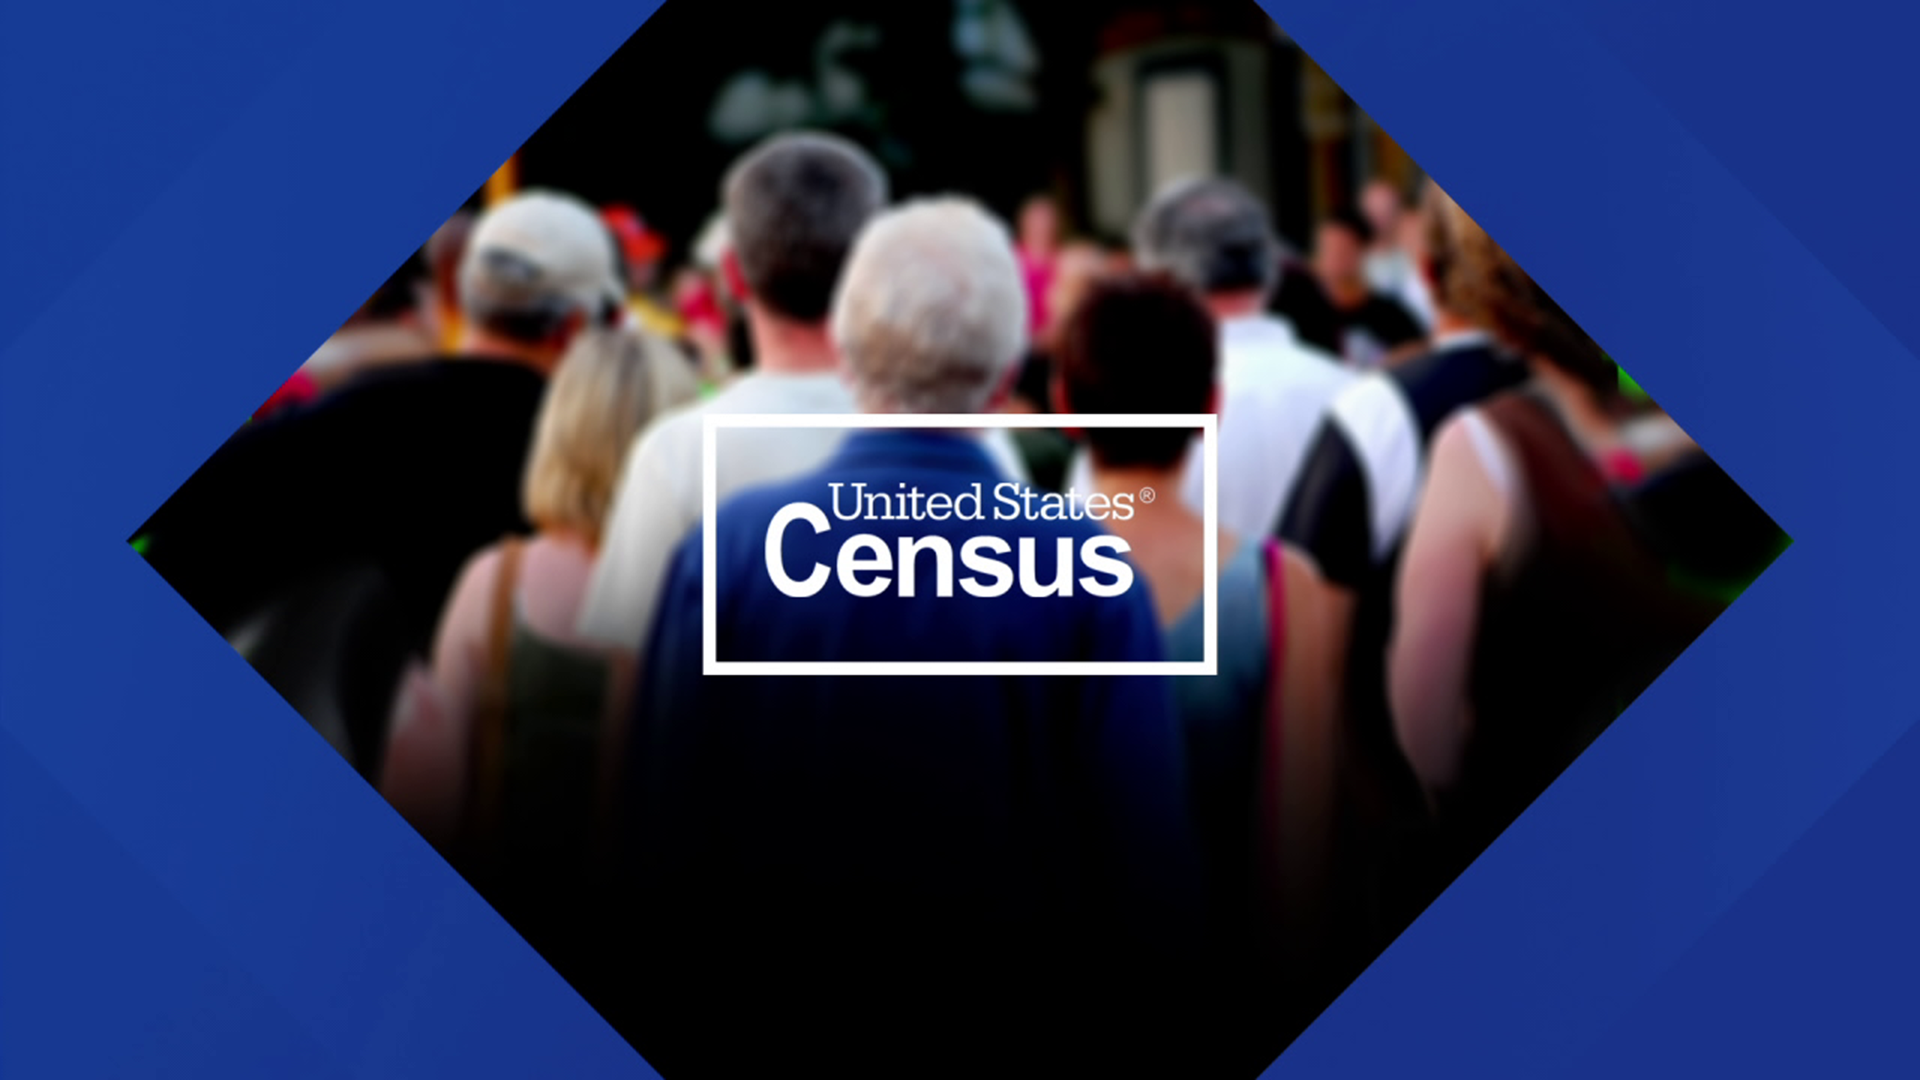 After much confusion over the census deadline, officials say it's better to get it done sooner rather than later.